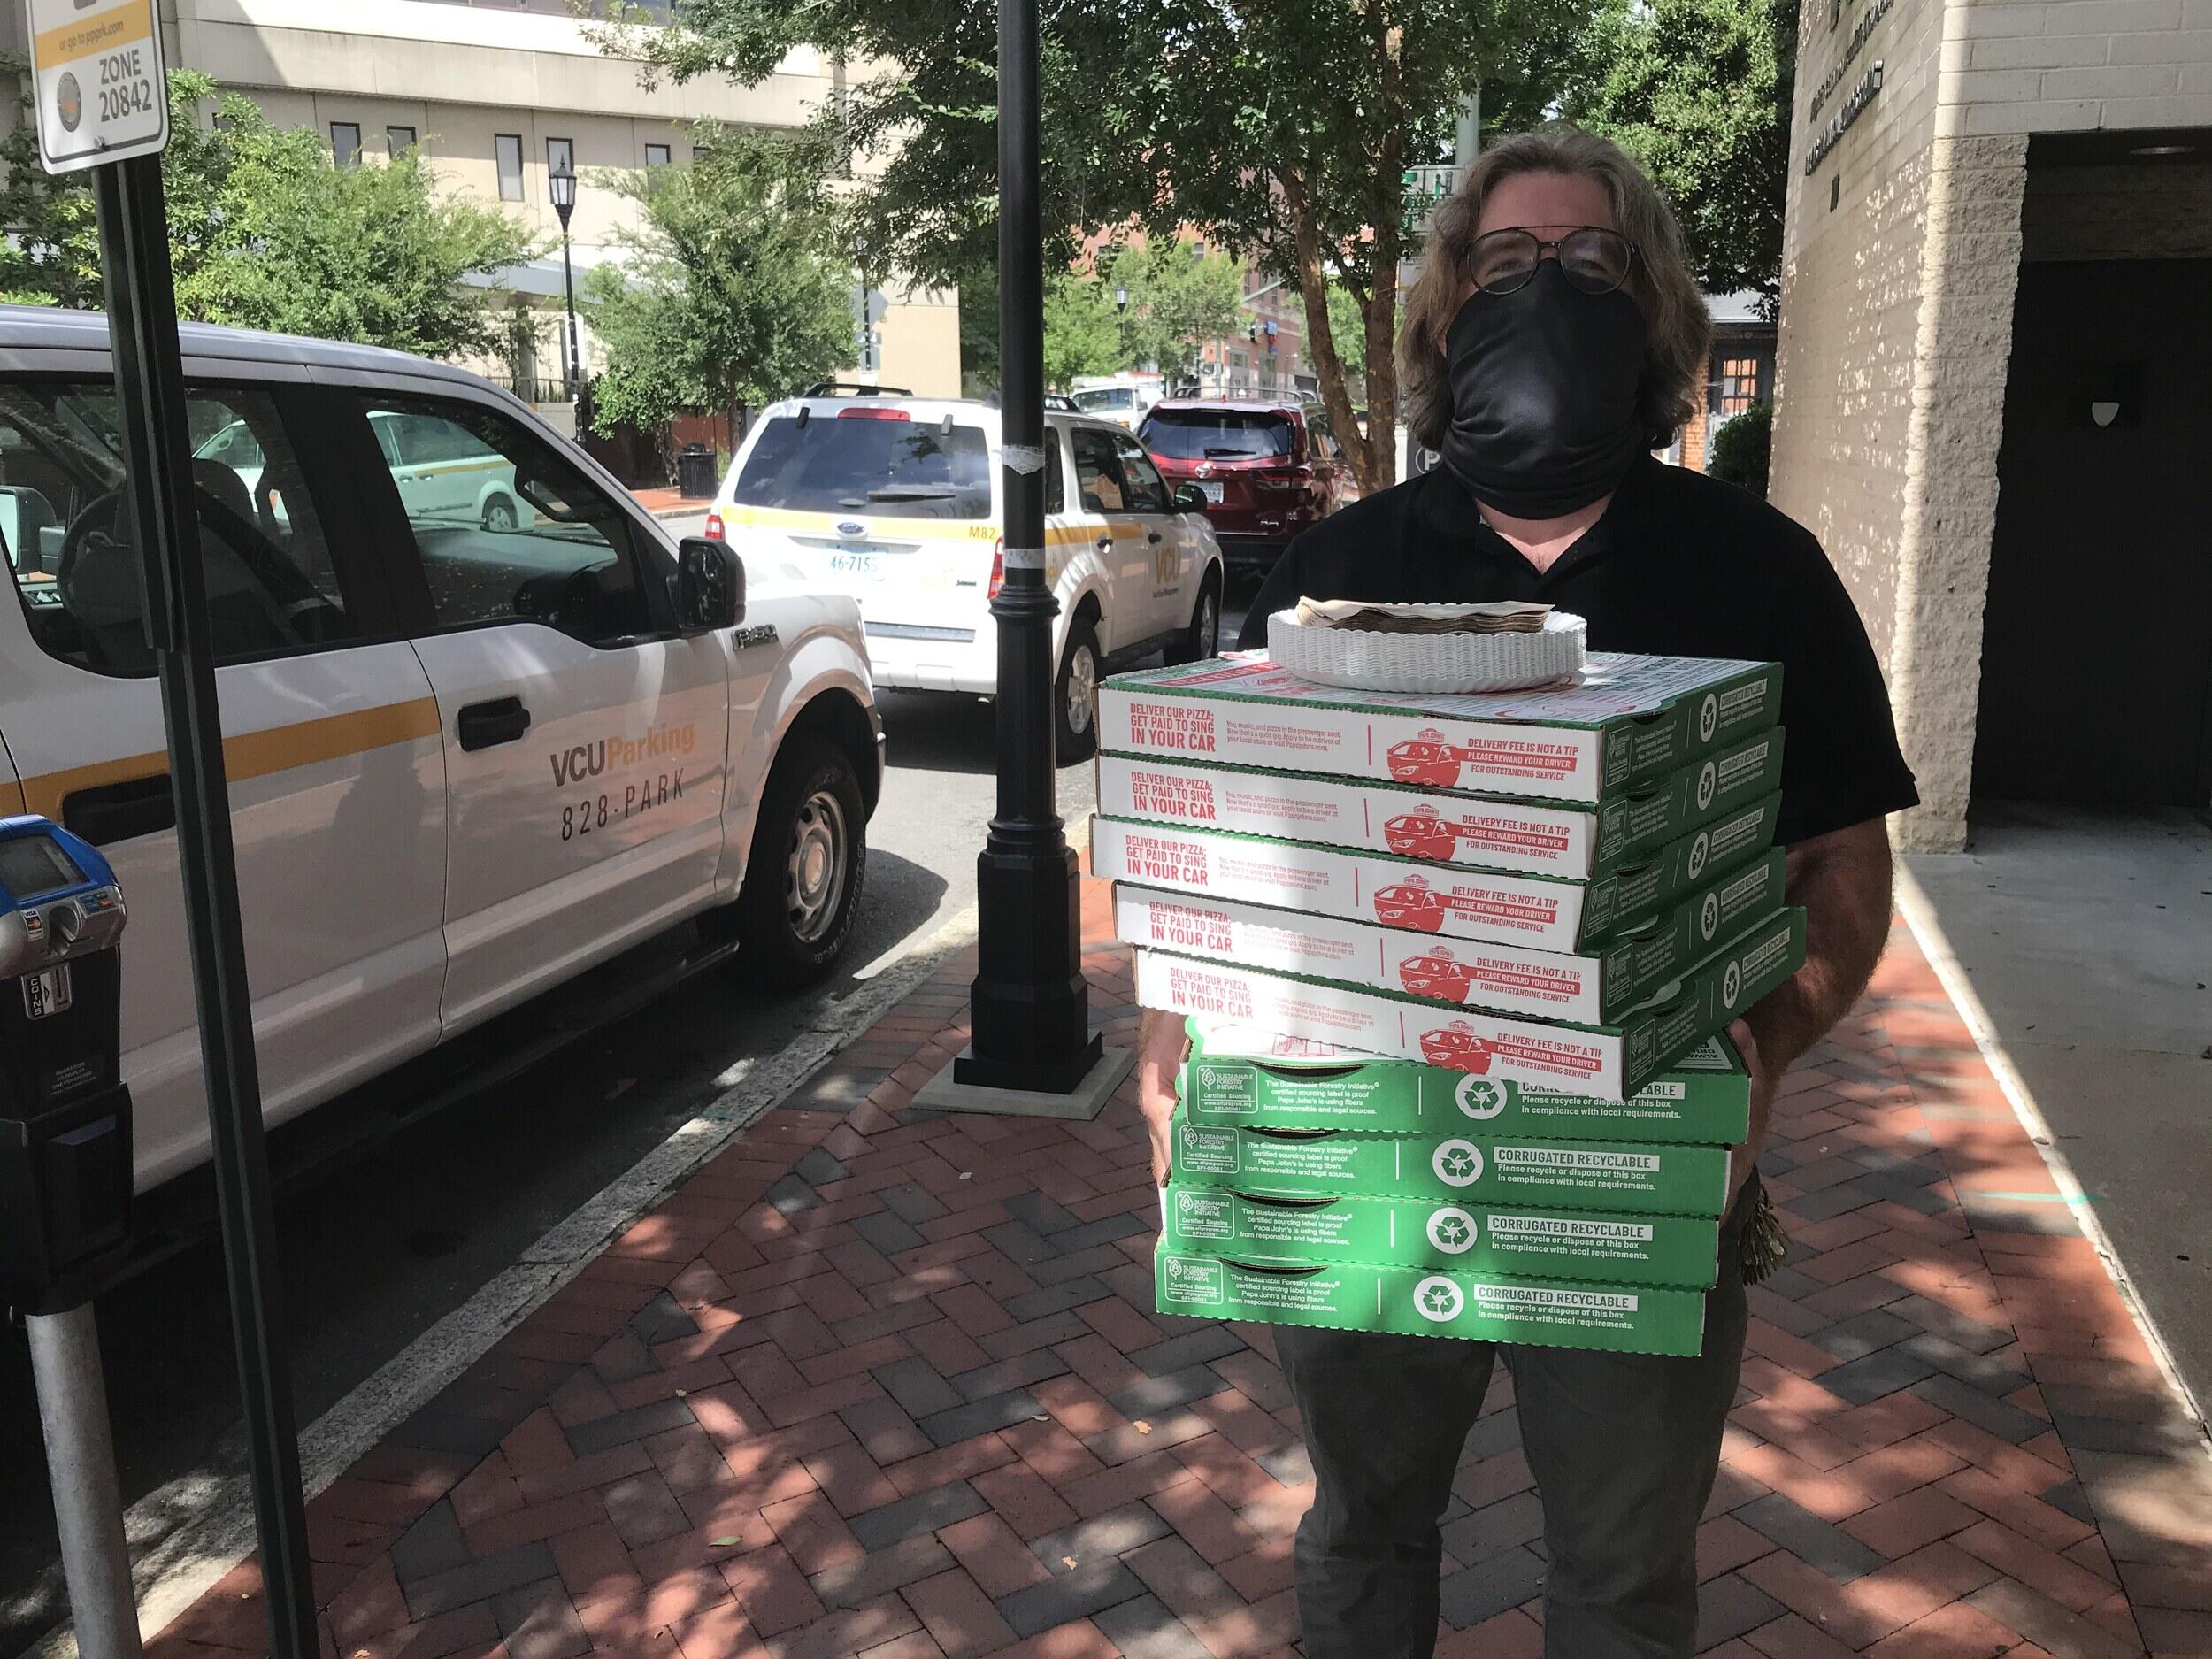 A person wearing a mask carries boxes of pizza, paper plates, and napkins.